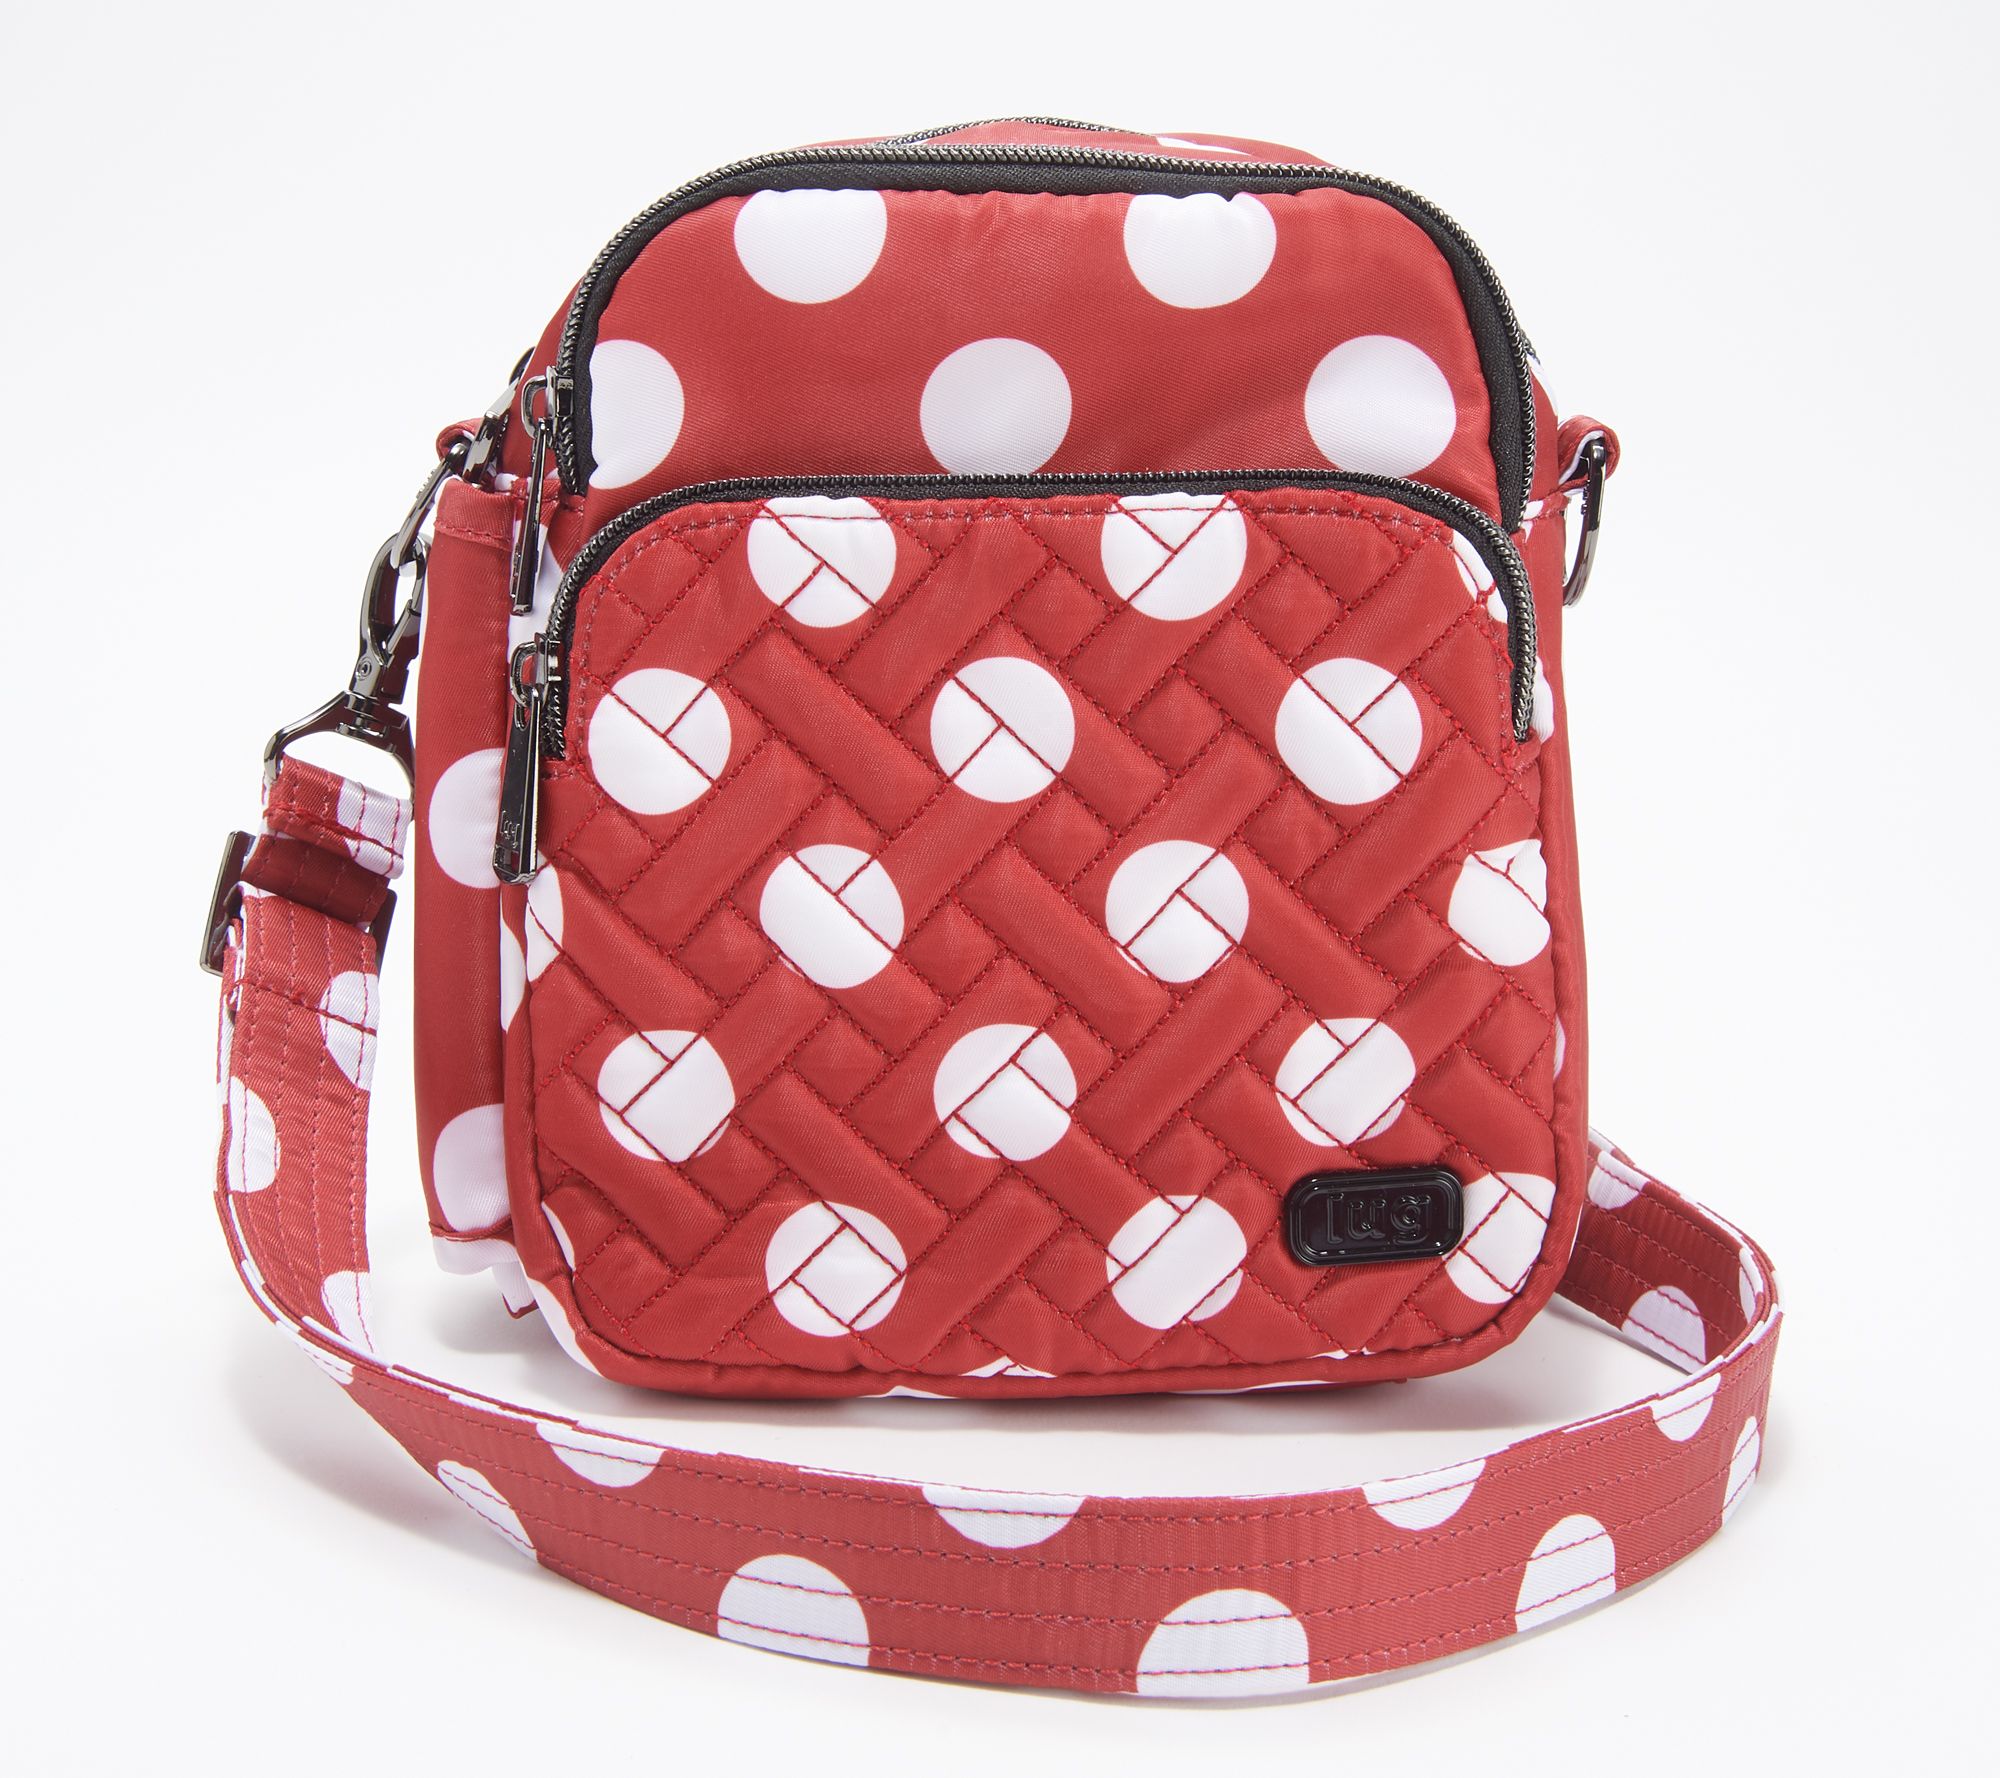 Anello and Paquet du Cadeau Crossover (Red) Mini Tote Zip Lunch Cooler Bag  